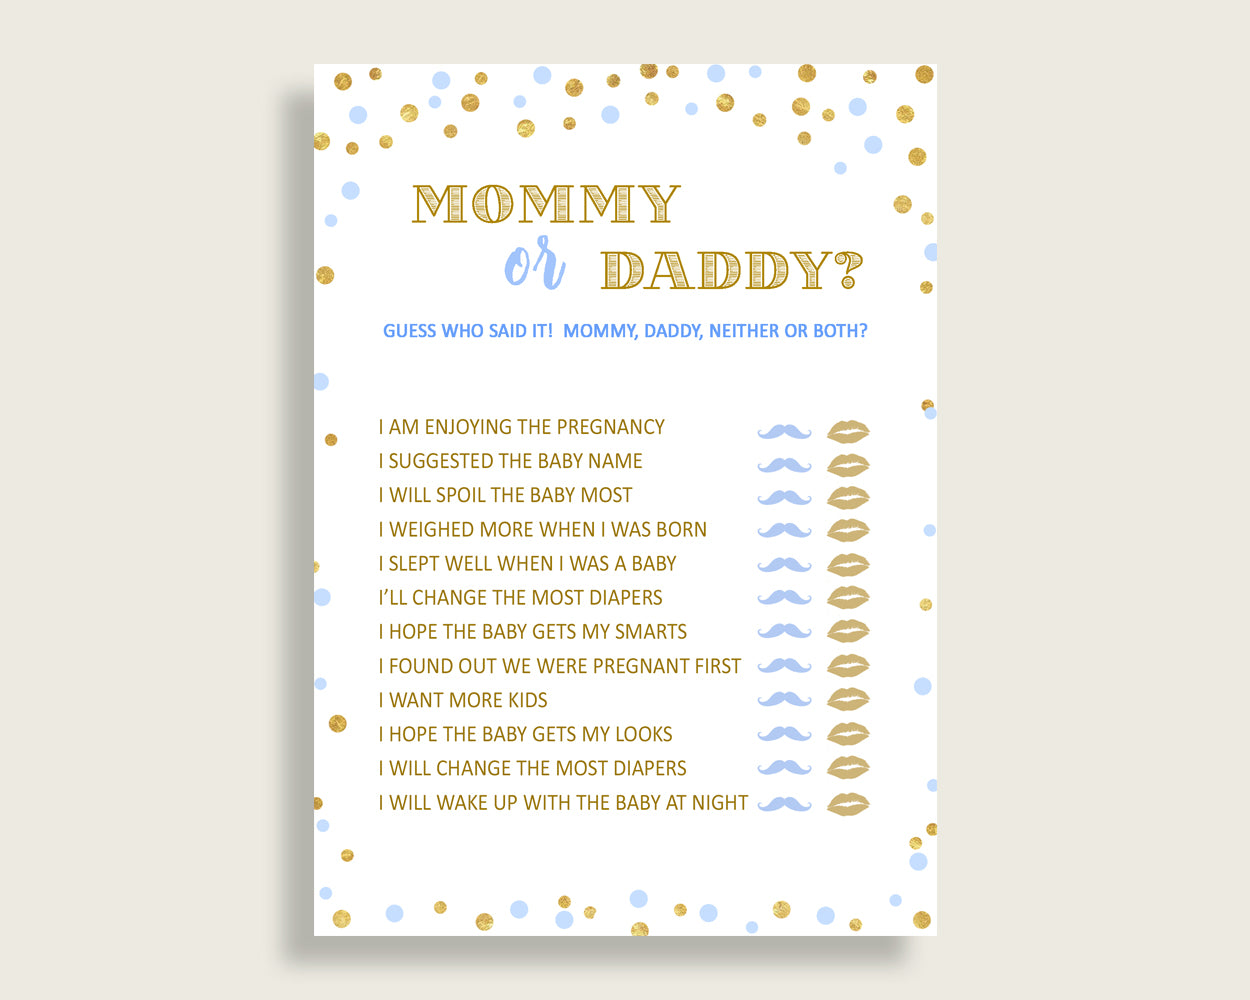 Mommy Or Daddy Baby Shower Mommy Or Daddy Confetti Baby Shower Mommy Or Daddy Blue Gold Baby Shower Confetti Mommy Or Daddy prints cb001